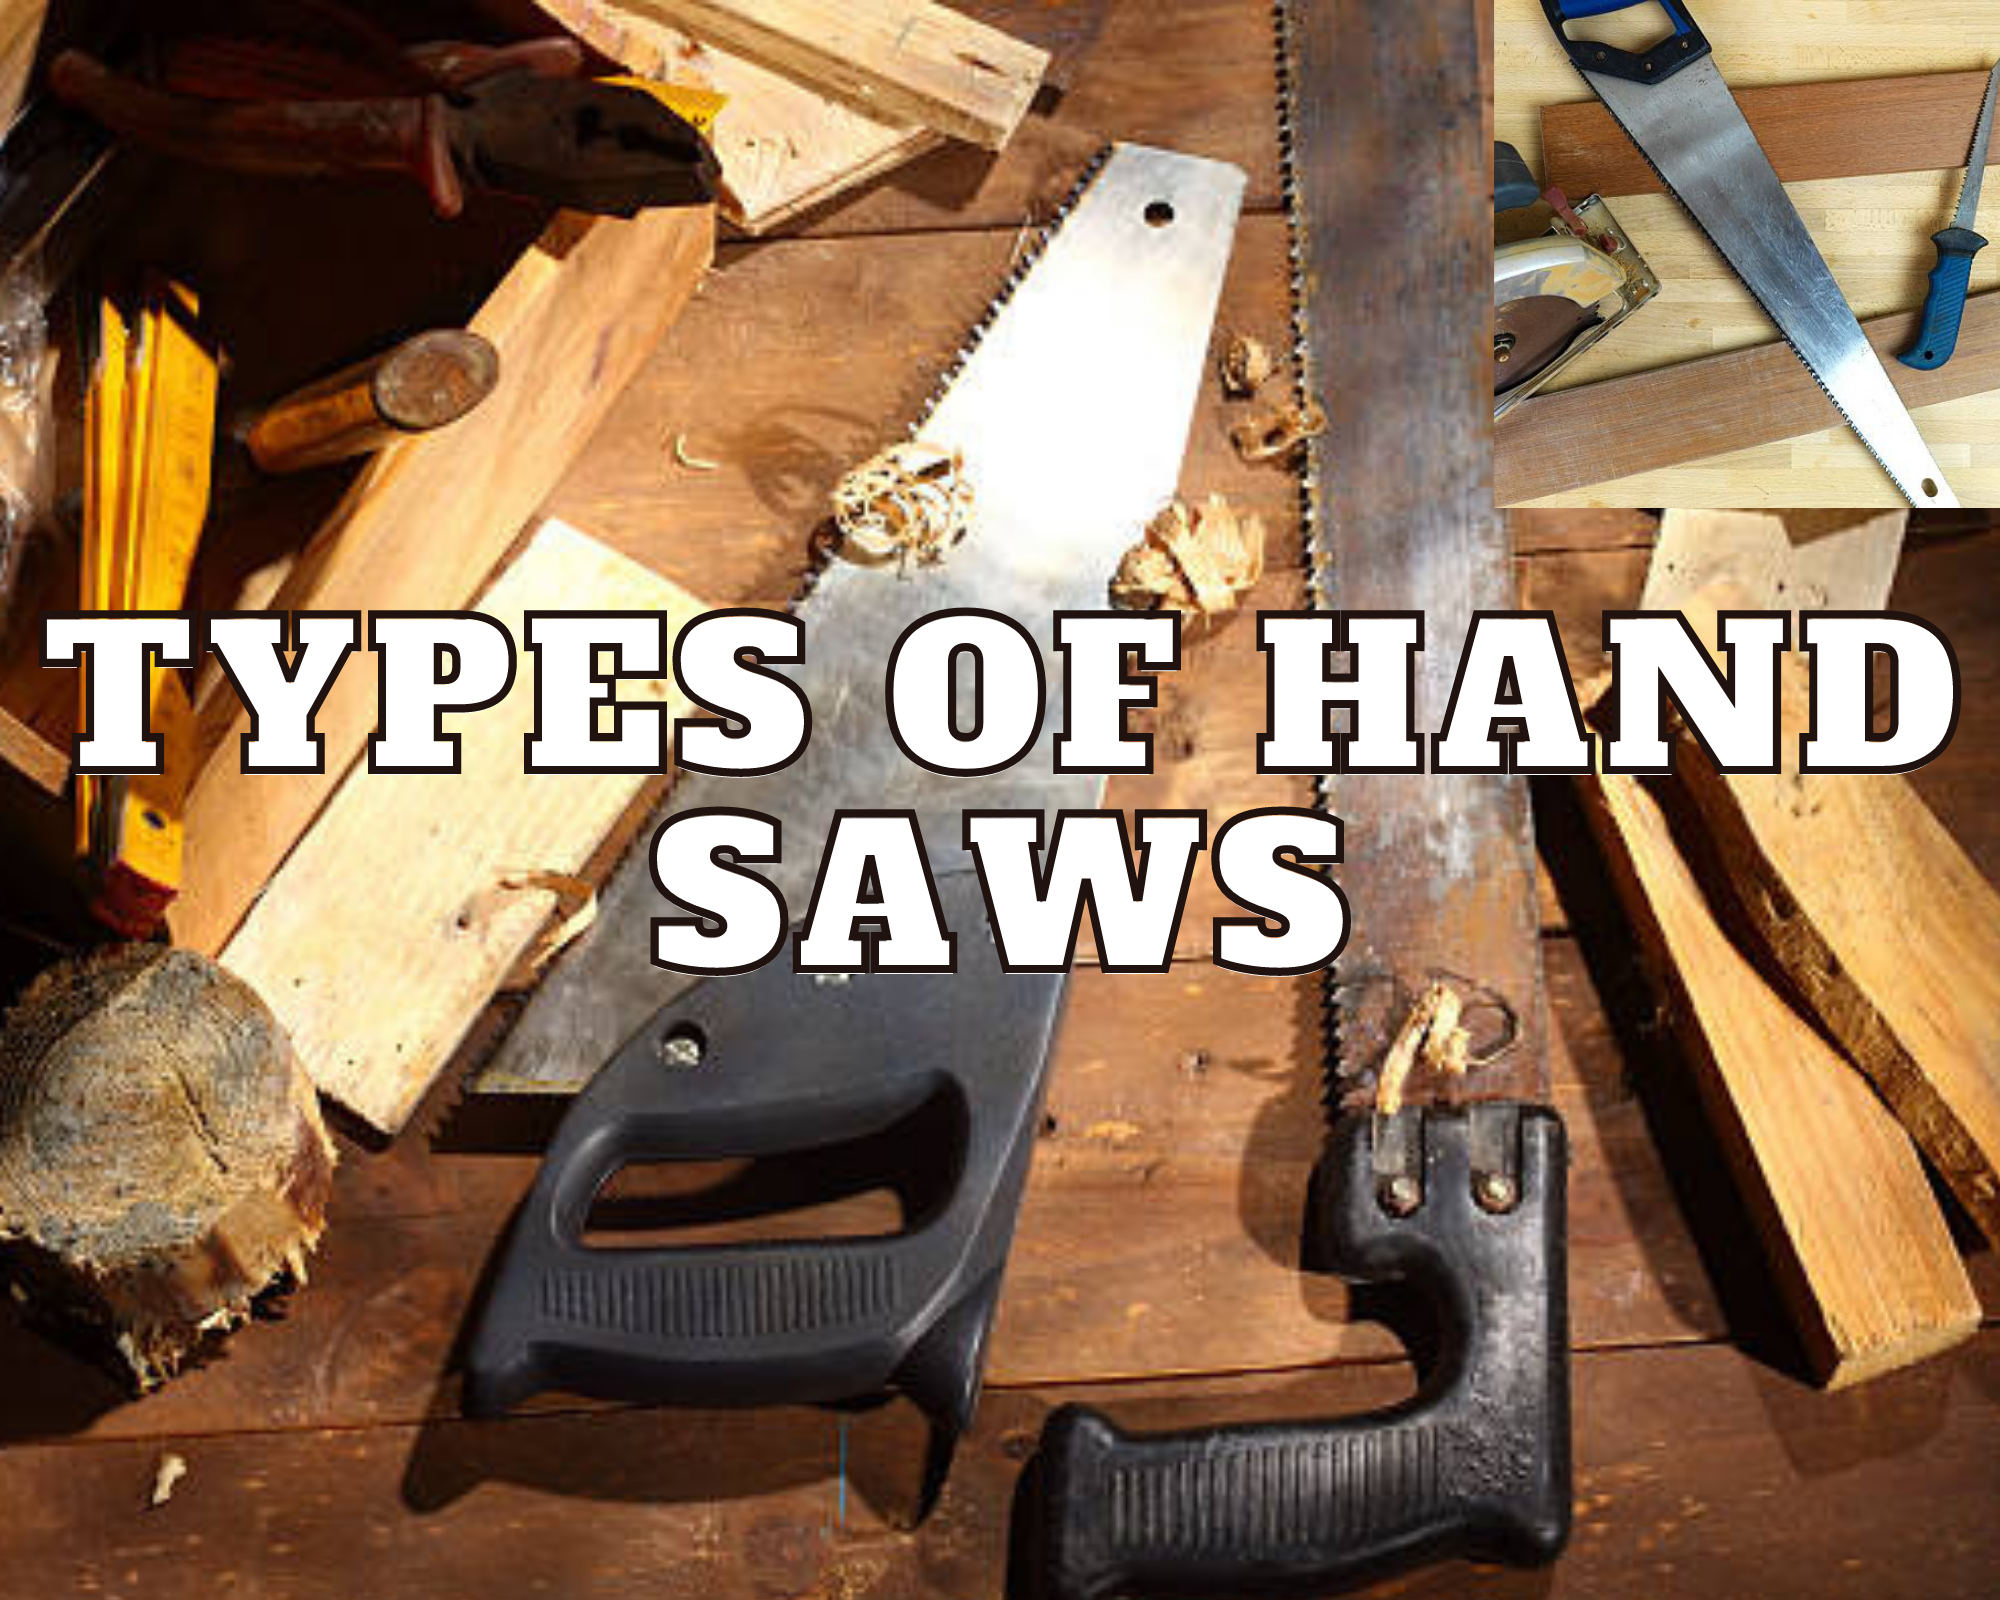 TYPES OF HAND SAWS